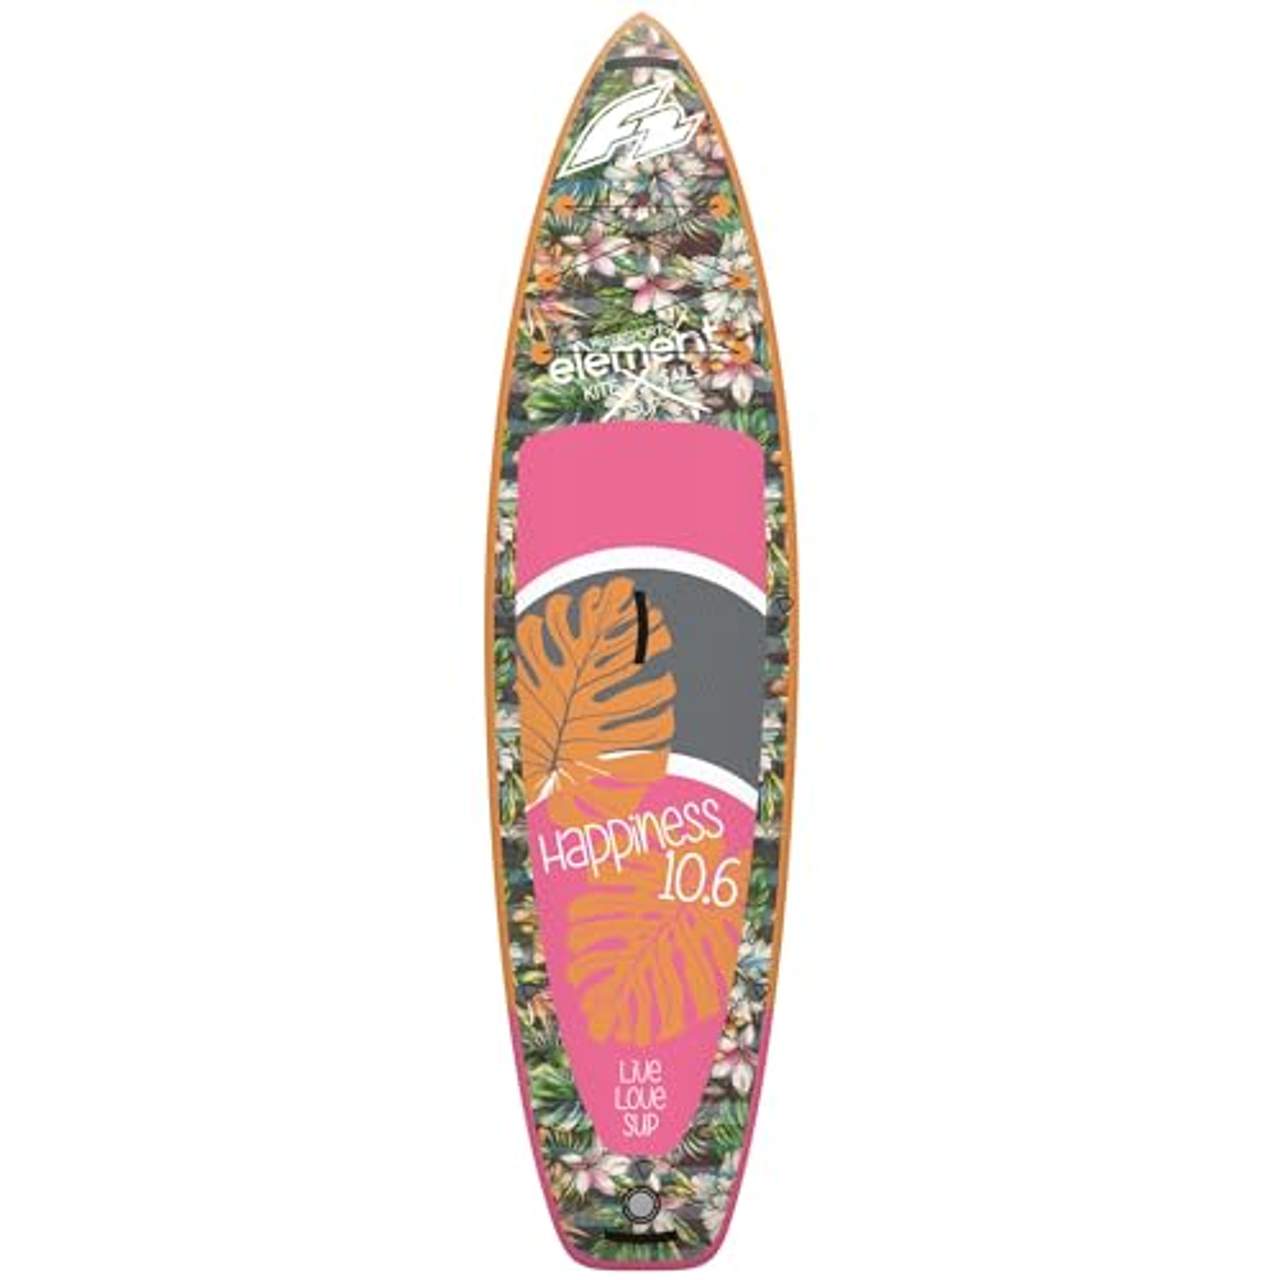 Campsup SUP F2 Happiness 10'6" Woman Aufblasbares Stand Up Paddle Board